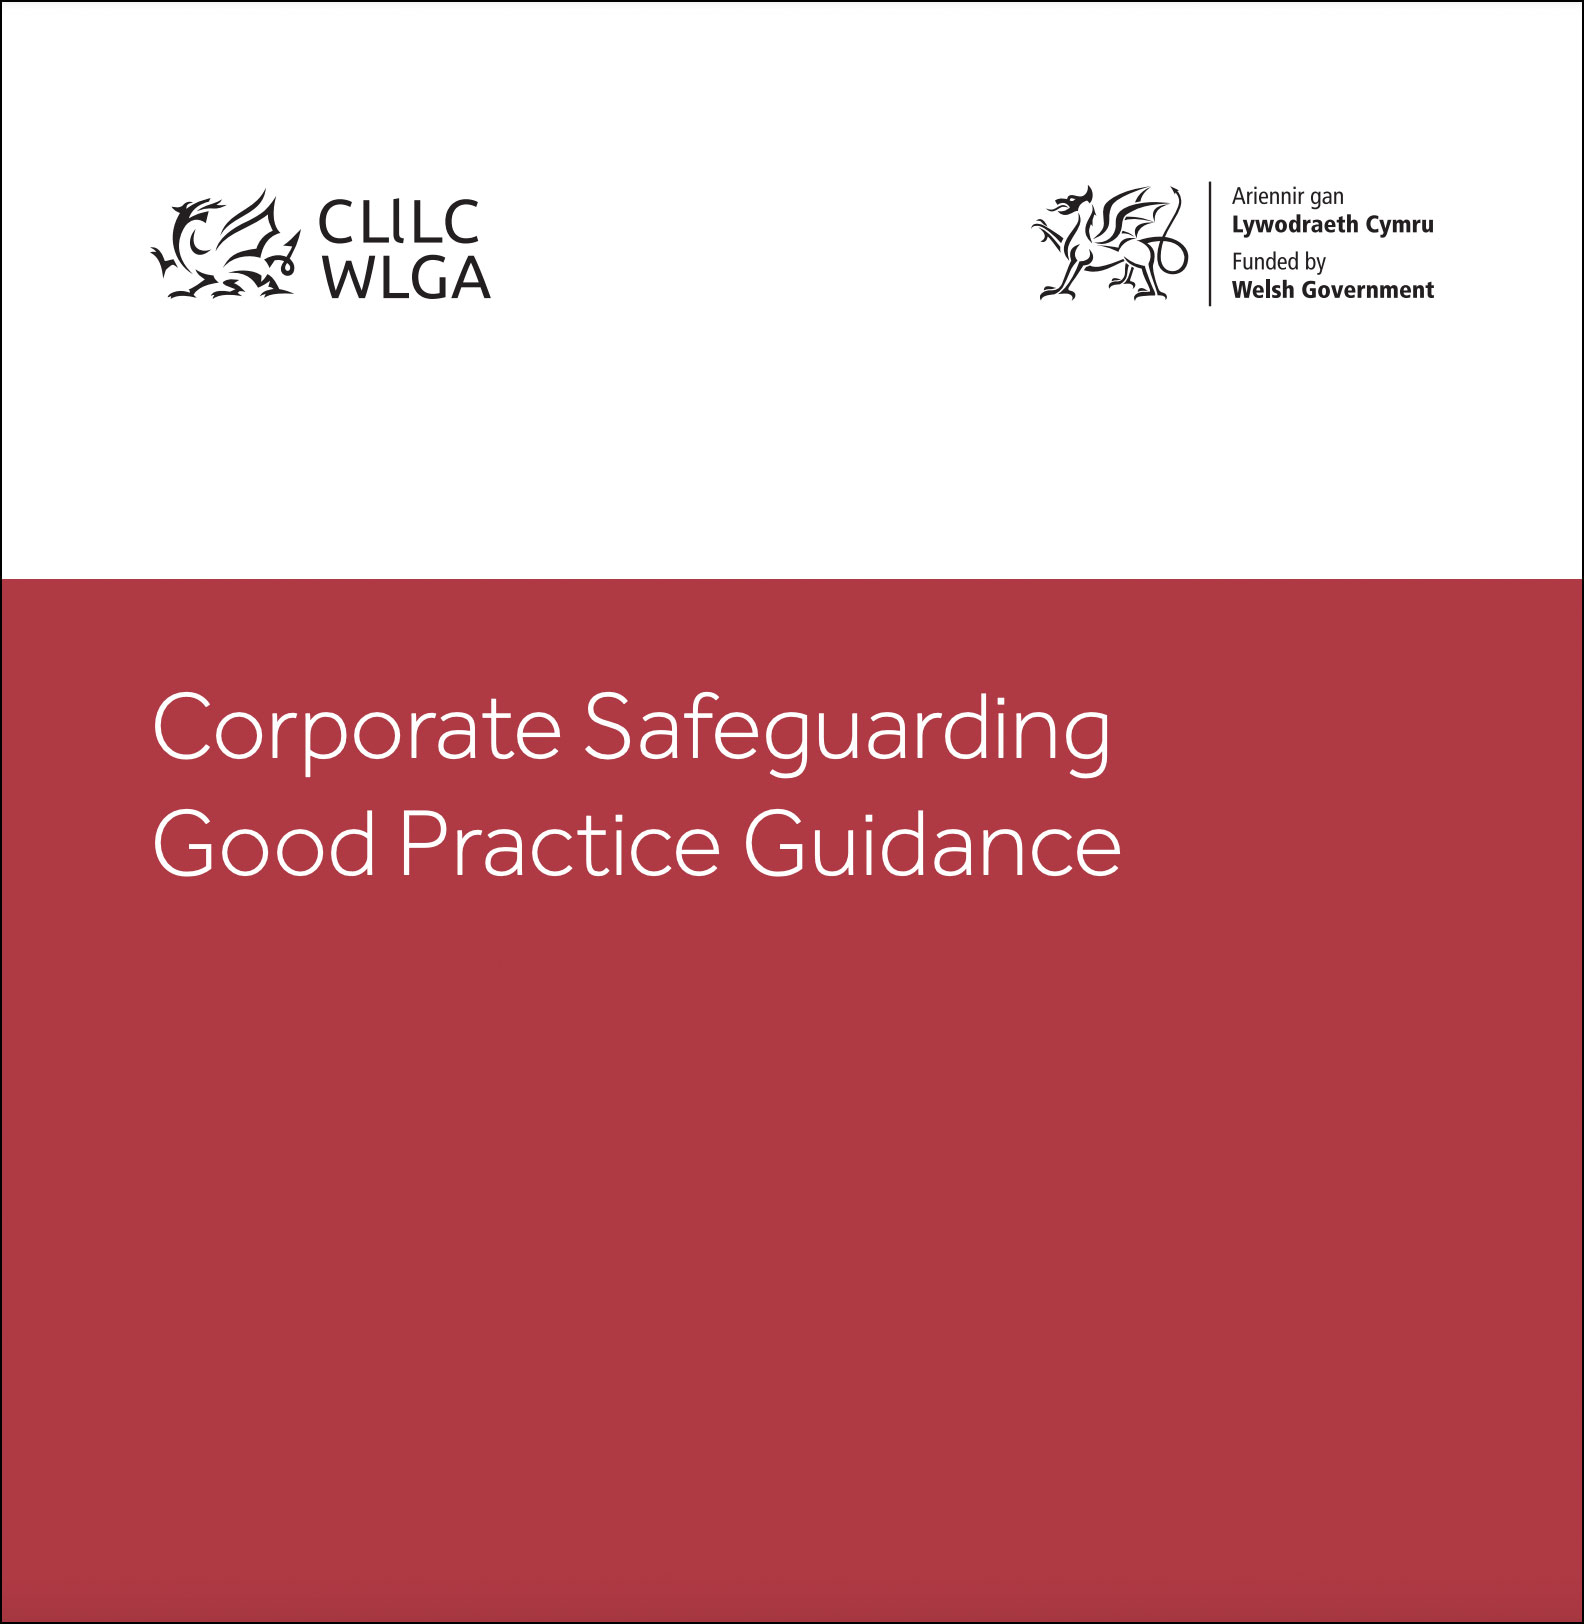 Front cover of the Corporate Safeguarding - Good Practice Guidance document